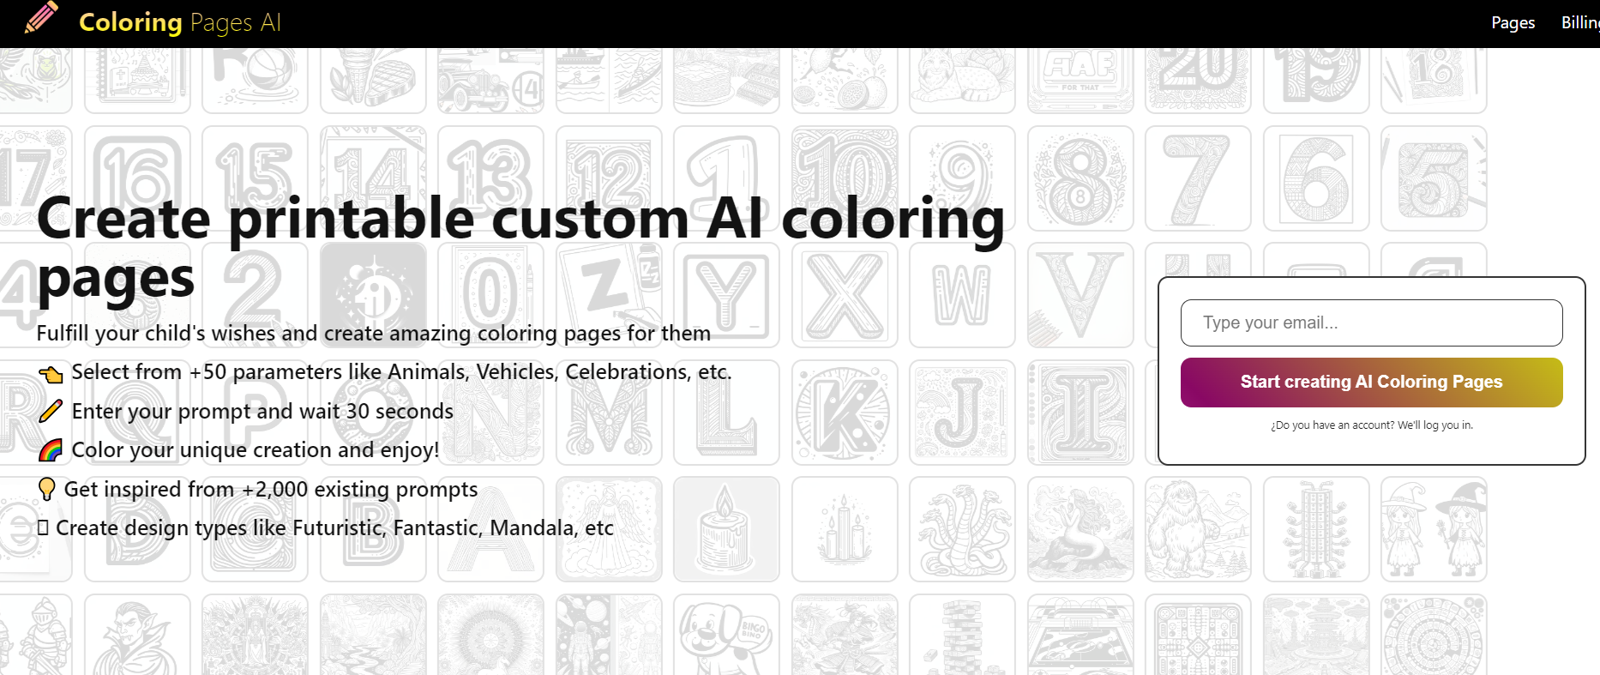 Coloring Pages AI website